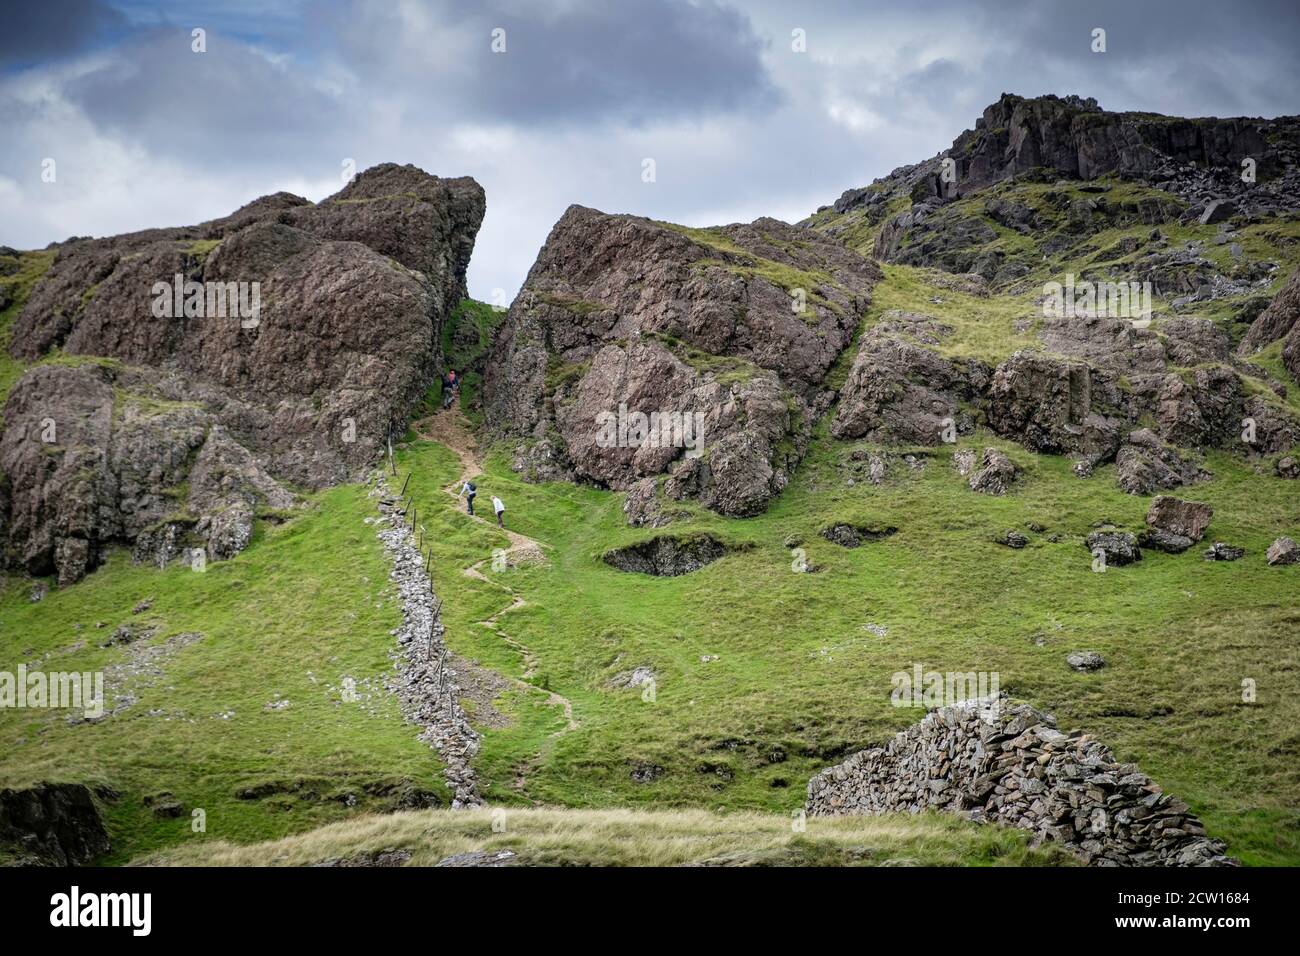 Moel yr Ogof, "Hill of the Cave" in the Moel Hebog range, Snowdonia, North Wales. The cave was a hiding place of Owain Glyndwr. Stock Photo